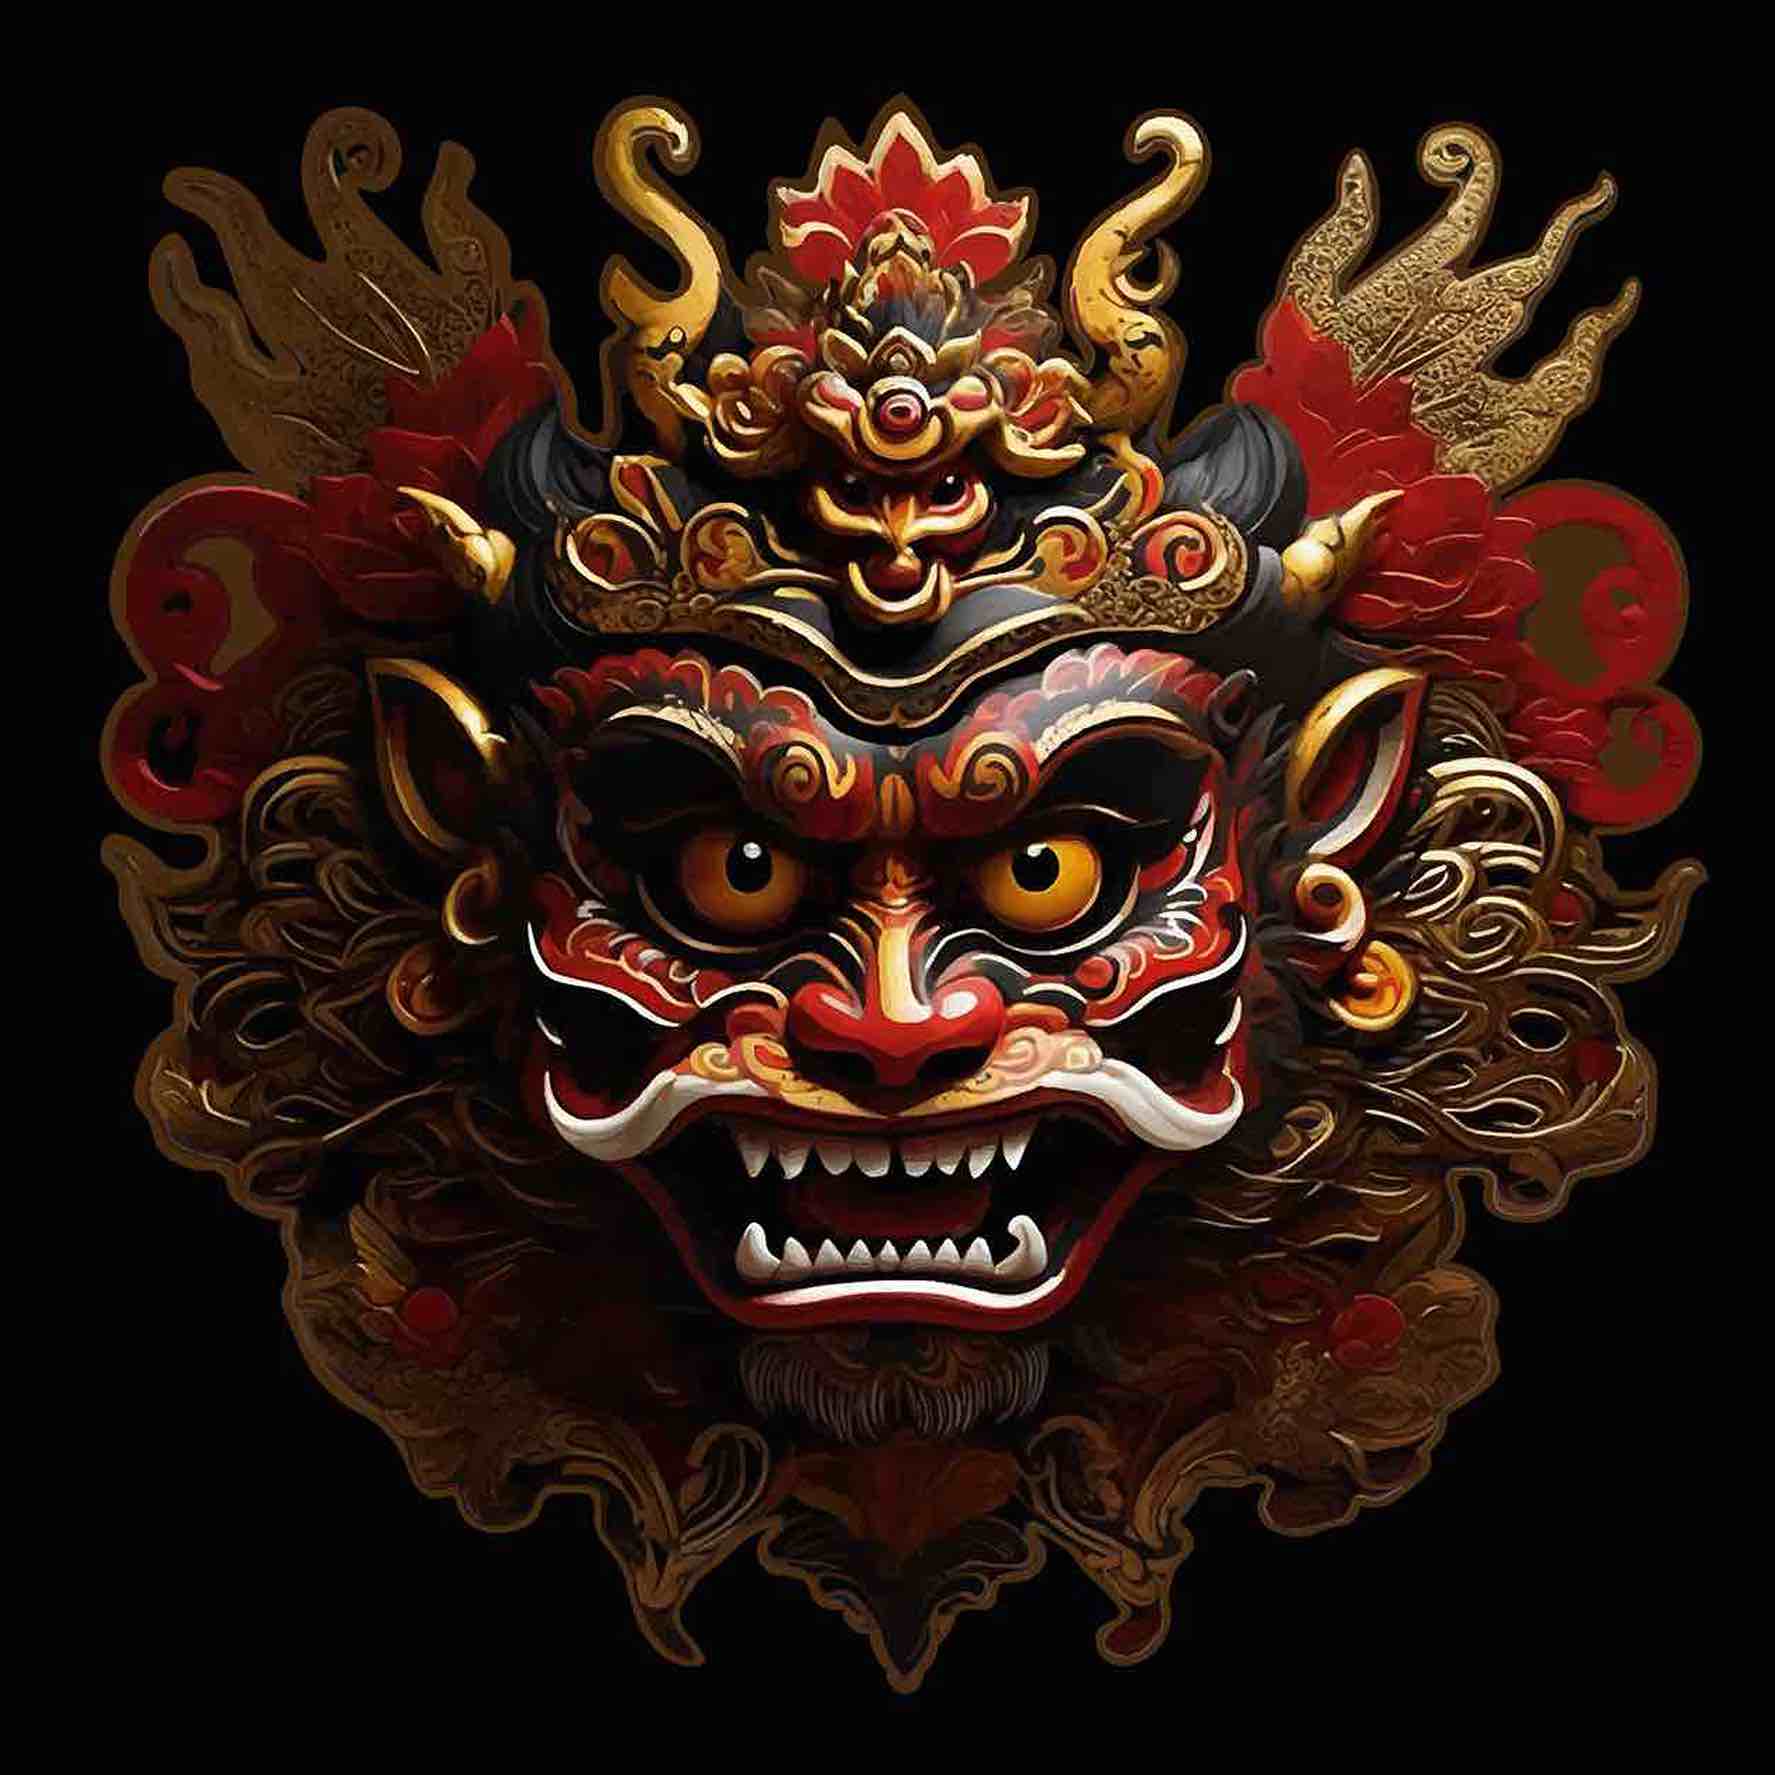 Balinese Lion Dance: A Collection of Intricate Barong Masks Suitable for Fashion and Art Lovers - only 10$ pinterest preview image.